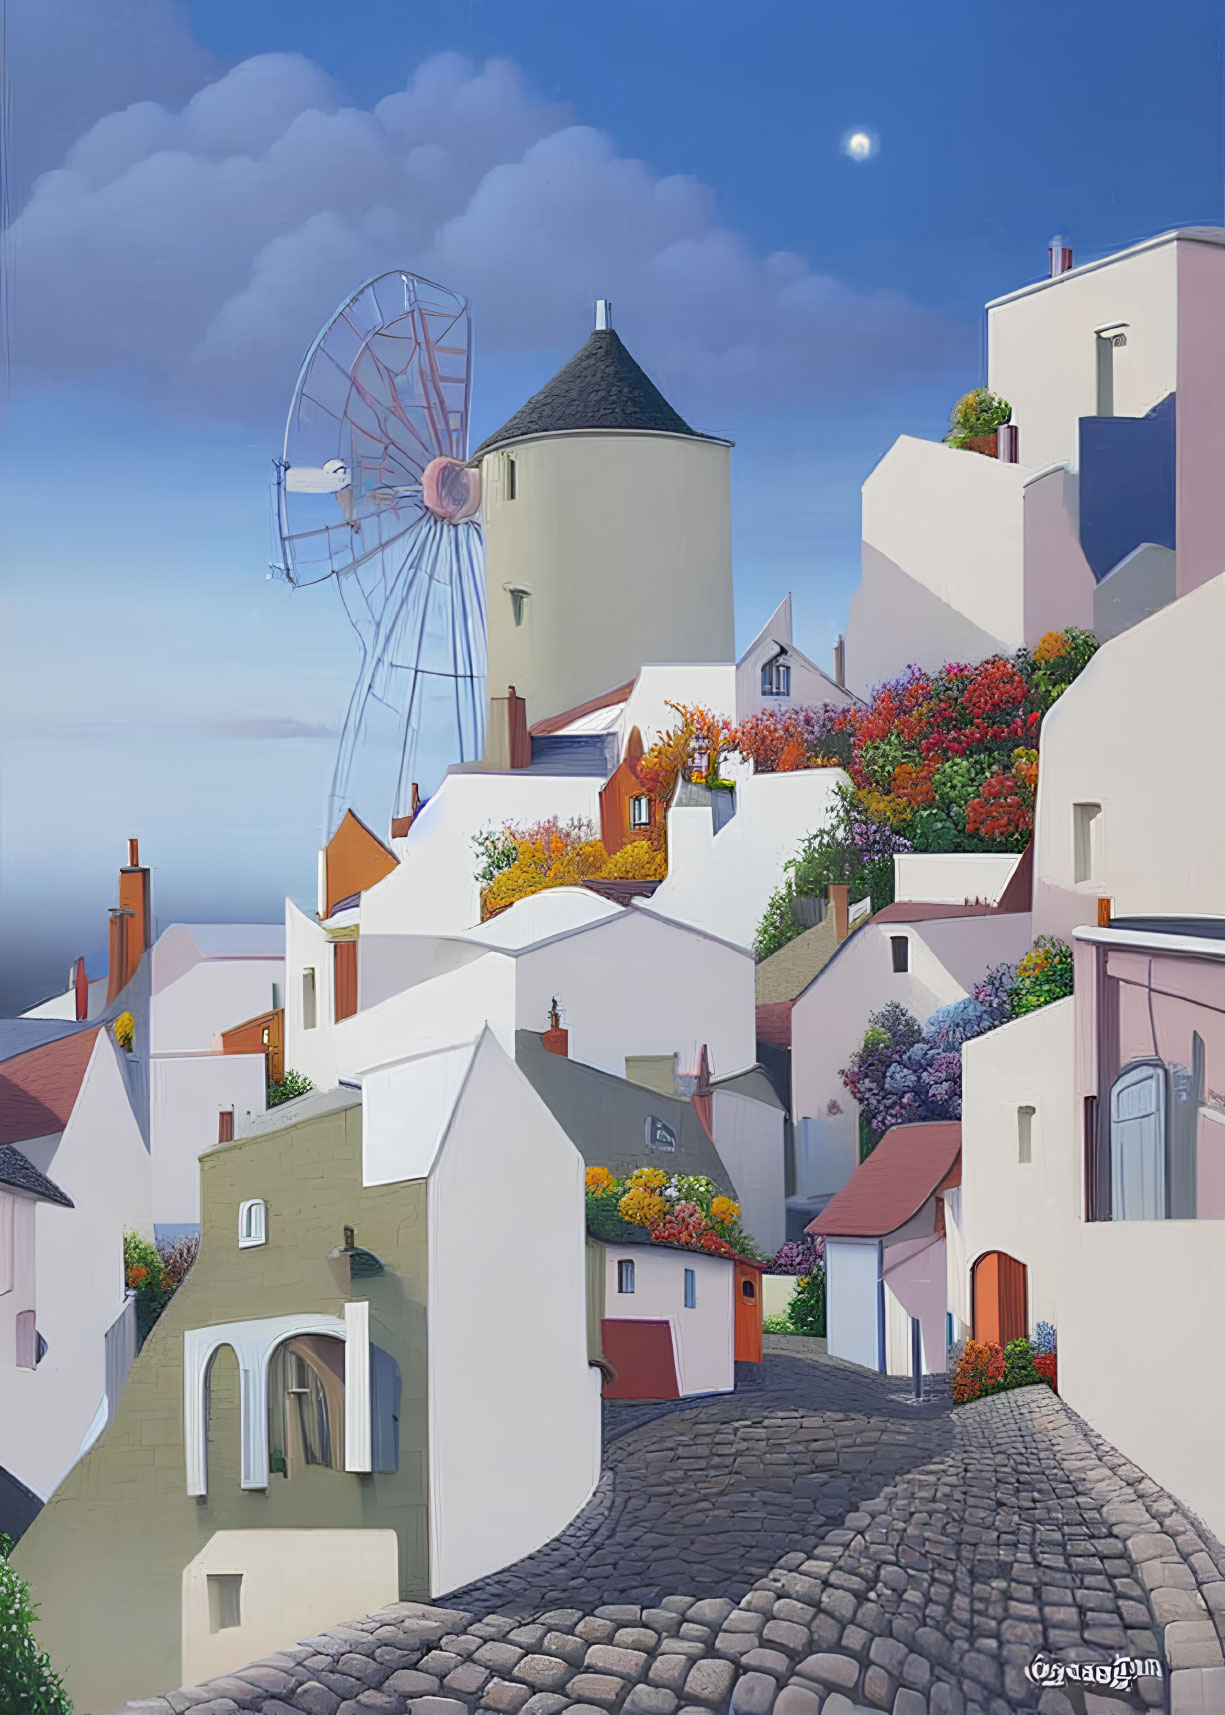 Quaint village painting with white houses, windmill, flowers, and crescent moon